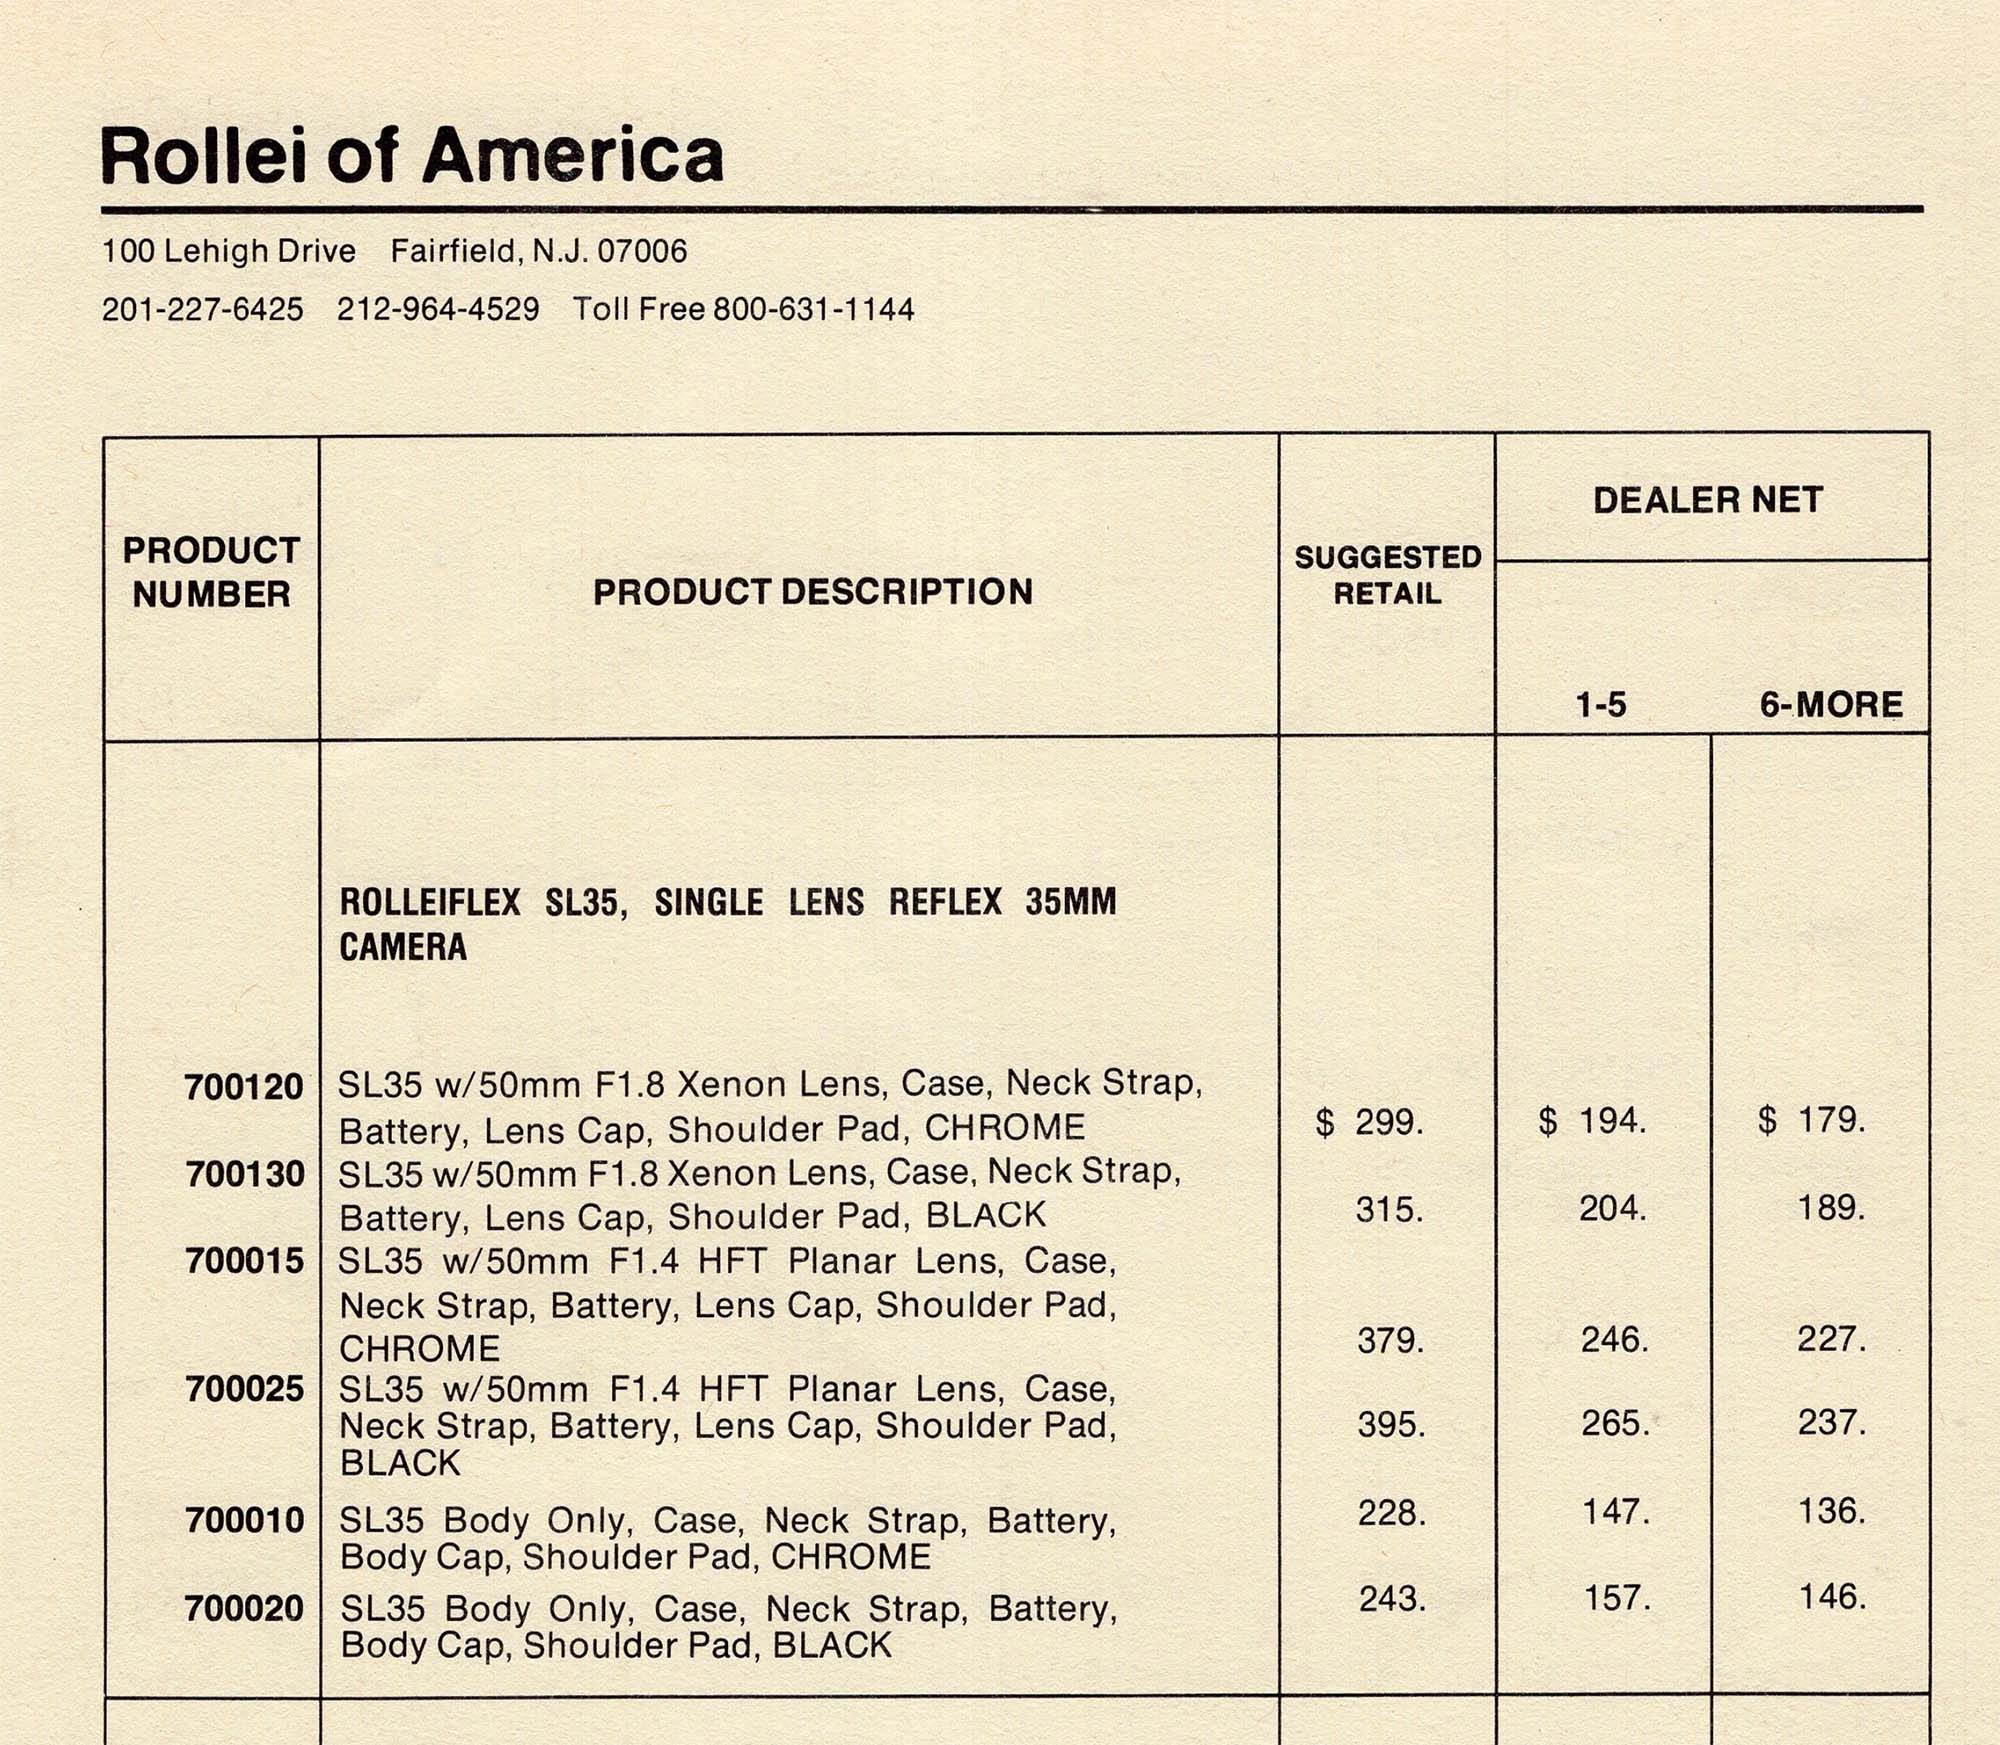 Rollei USA Dealer price list of 1976. $299 adjusted for inflation would be $2,088.05 in 2023 money.